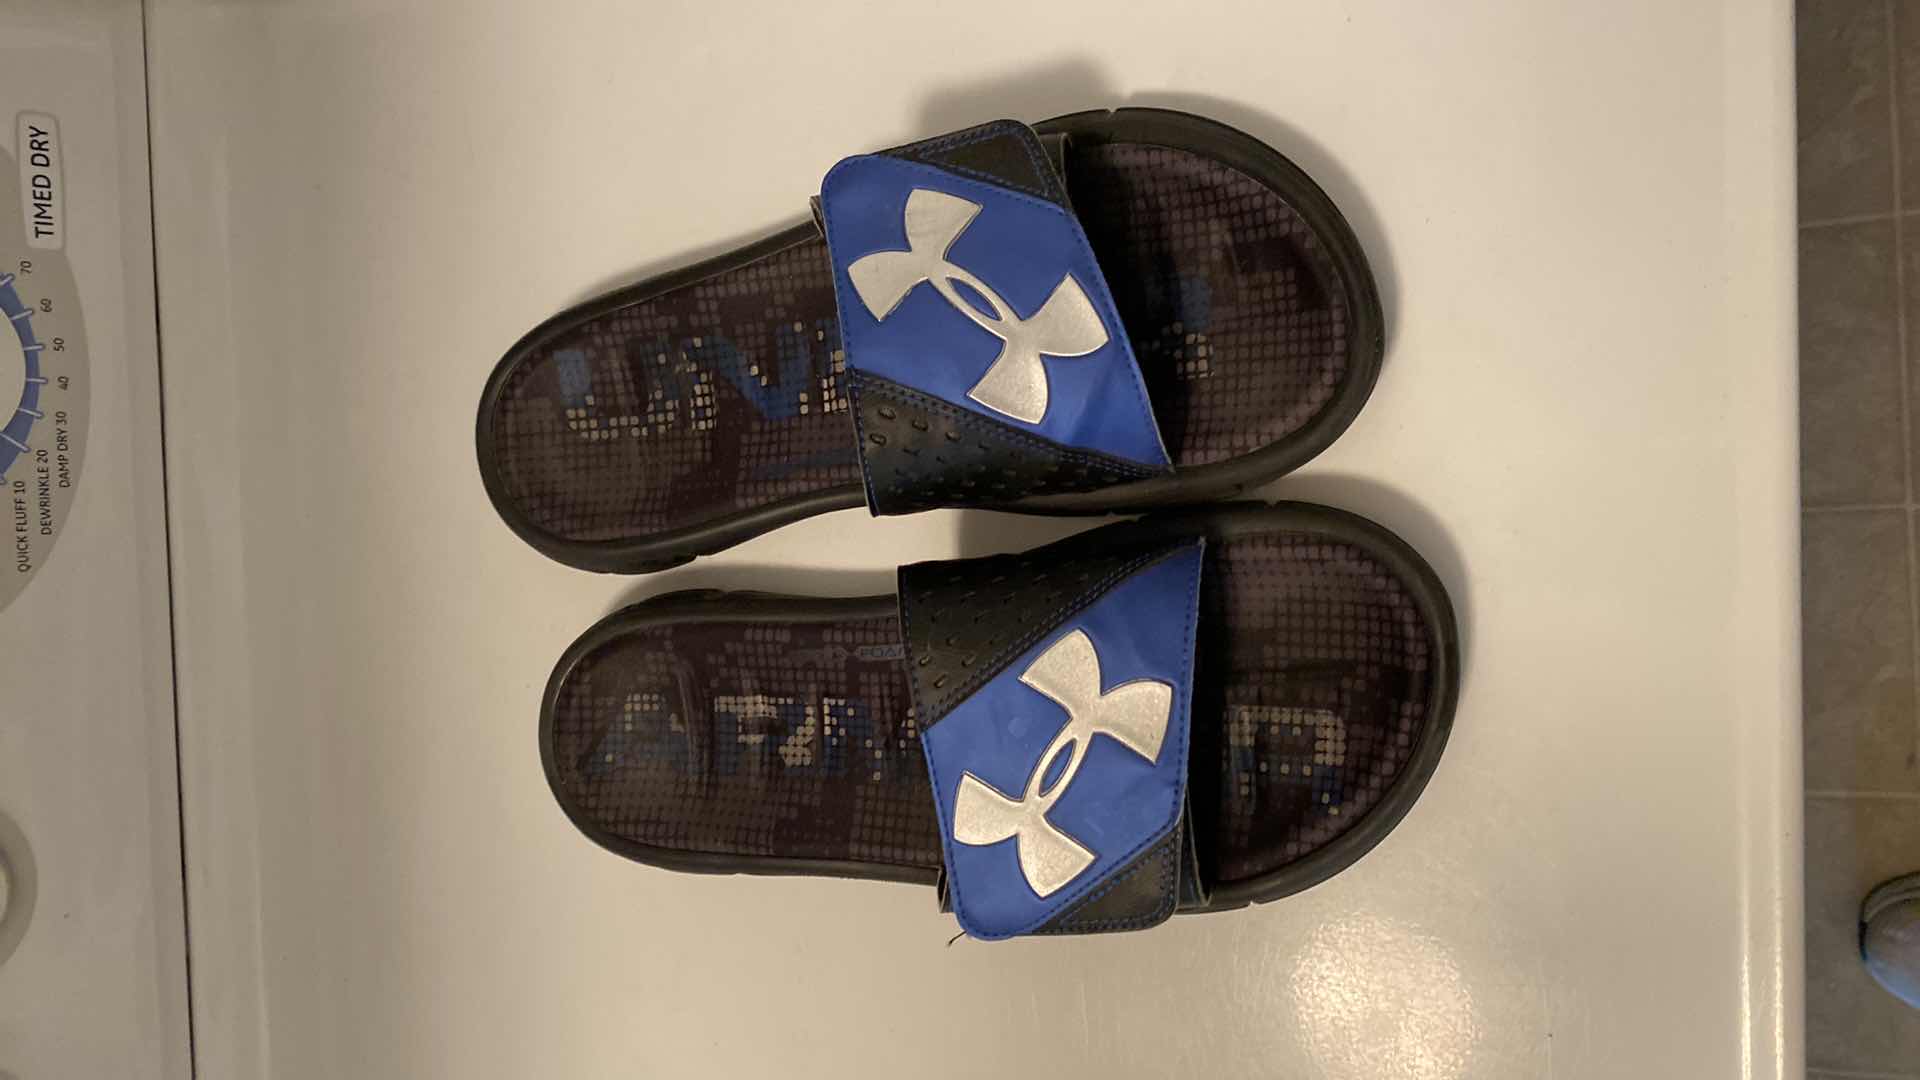 Photo 2 of UNDER ARMOUR SLIDES MENS SIZE 9